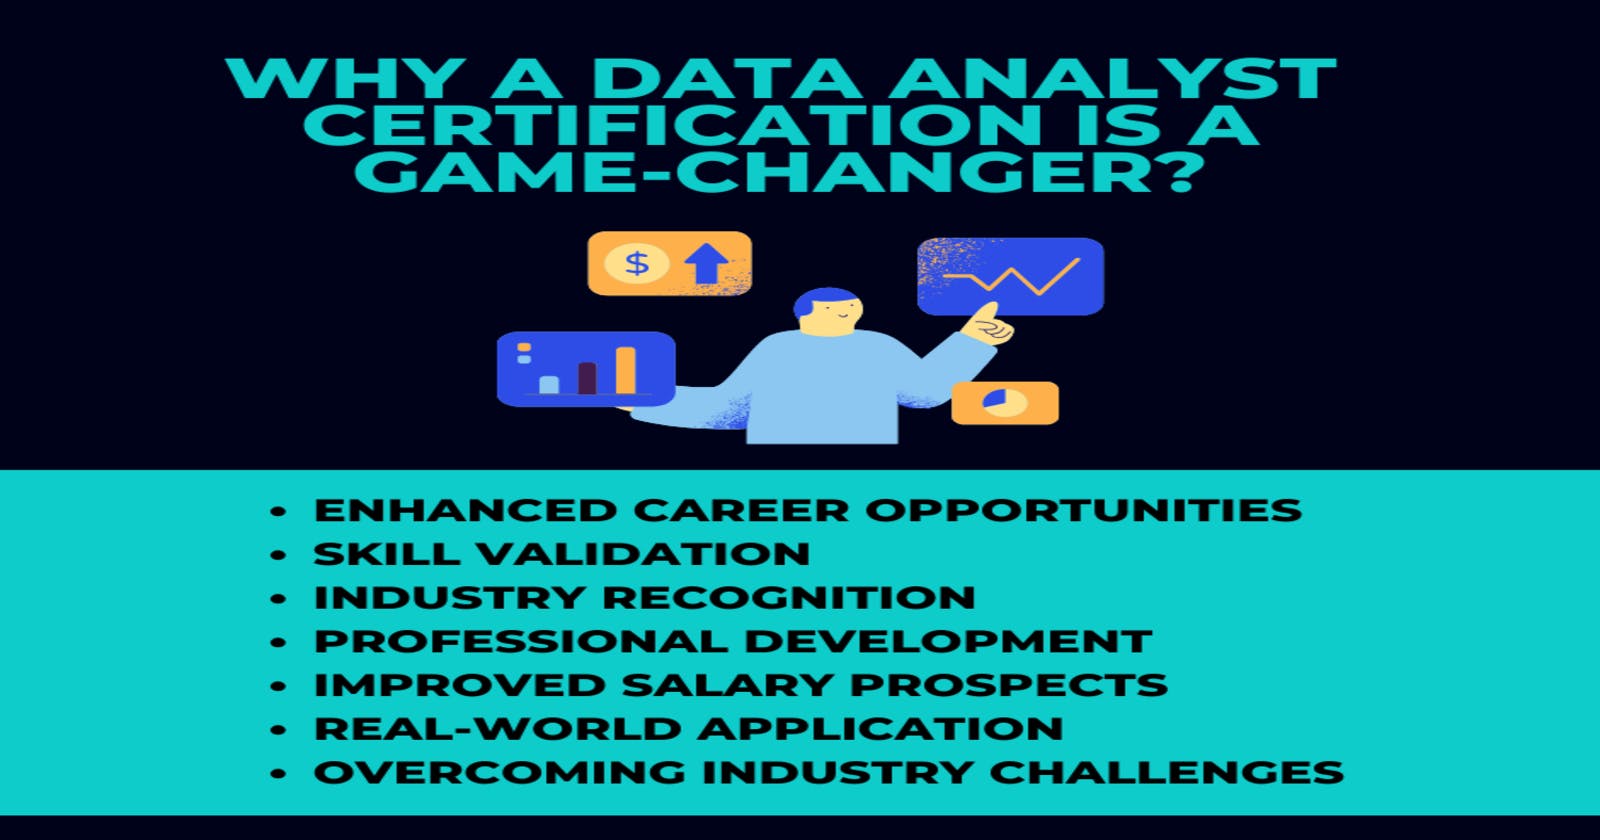 Why a Data Analyst Certification is a Game-Changer?